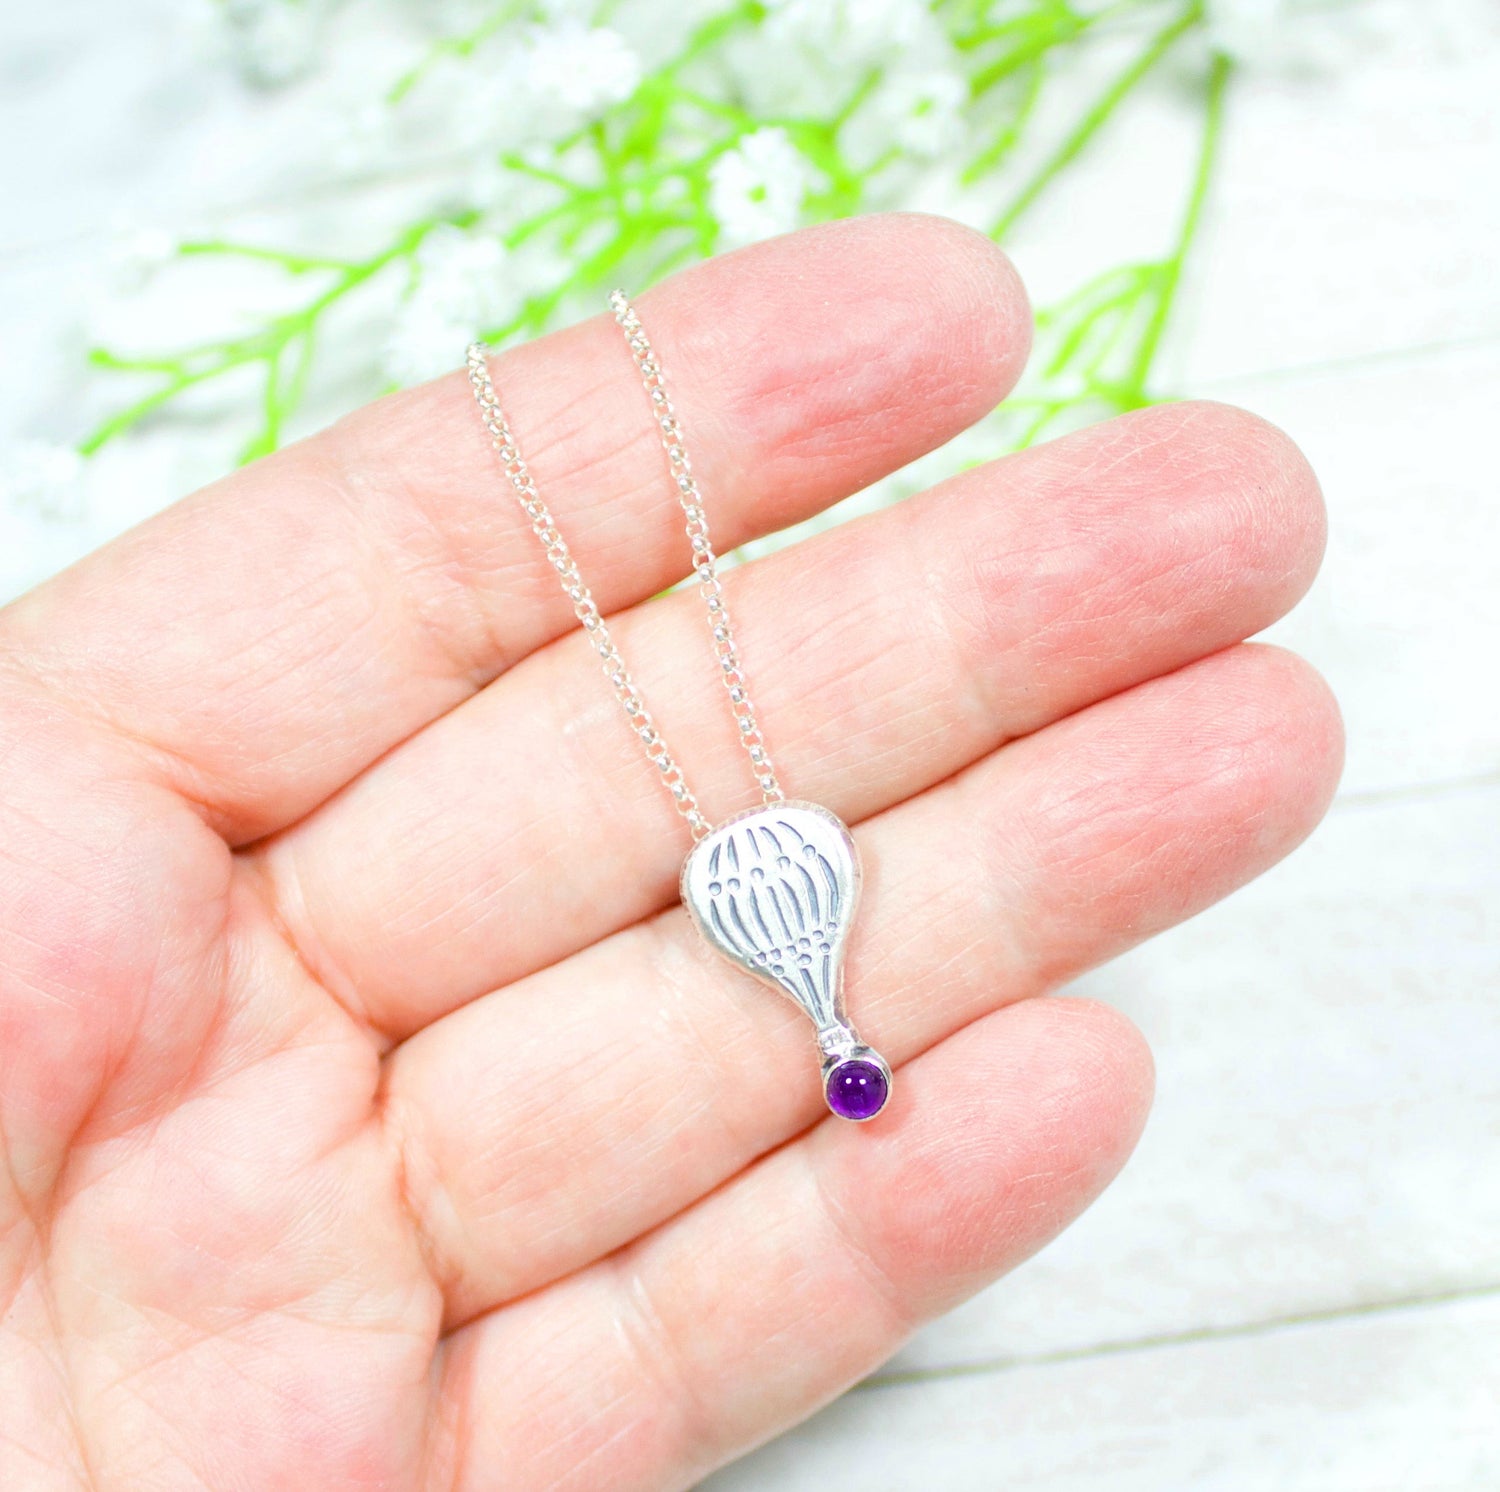 Hot air balloon shaped sterling silver pendant with a gemstone cabochon placed where the basket would be.  Shown with an amethyst and being held in the hand of a model to show size.